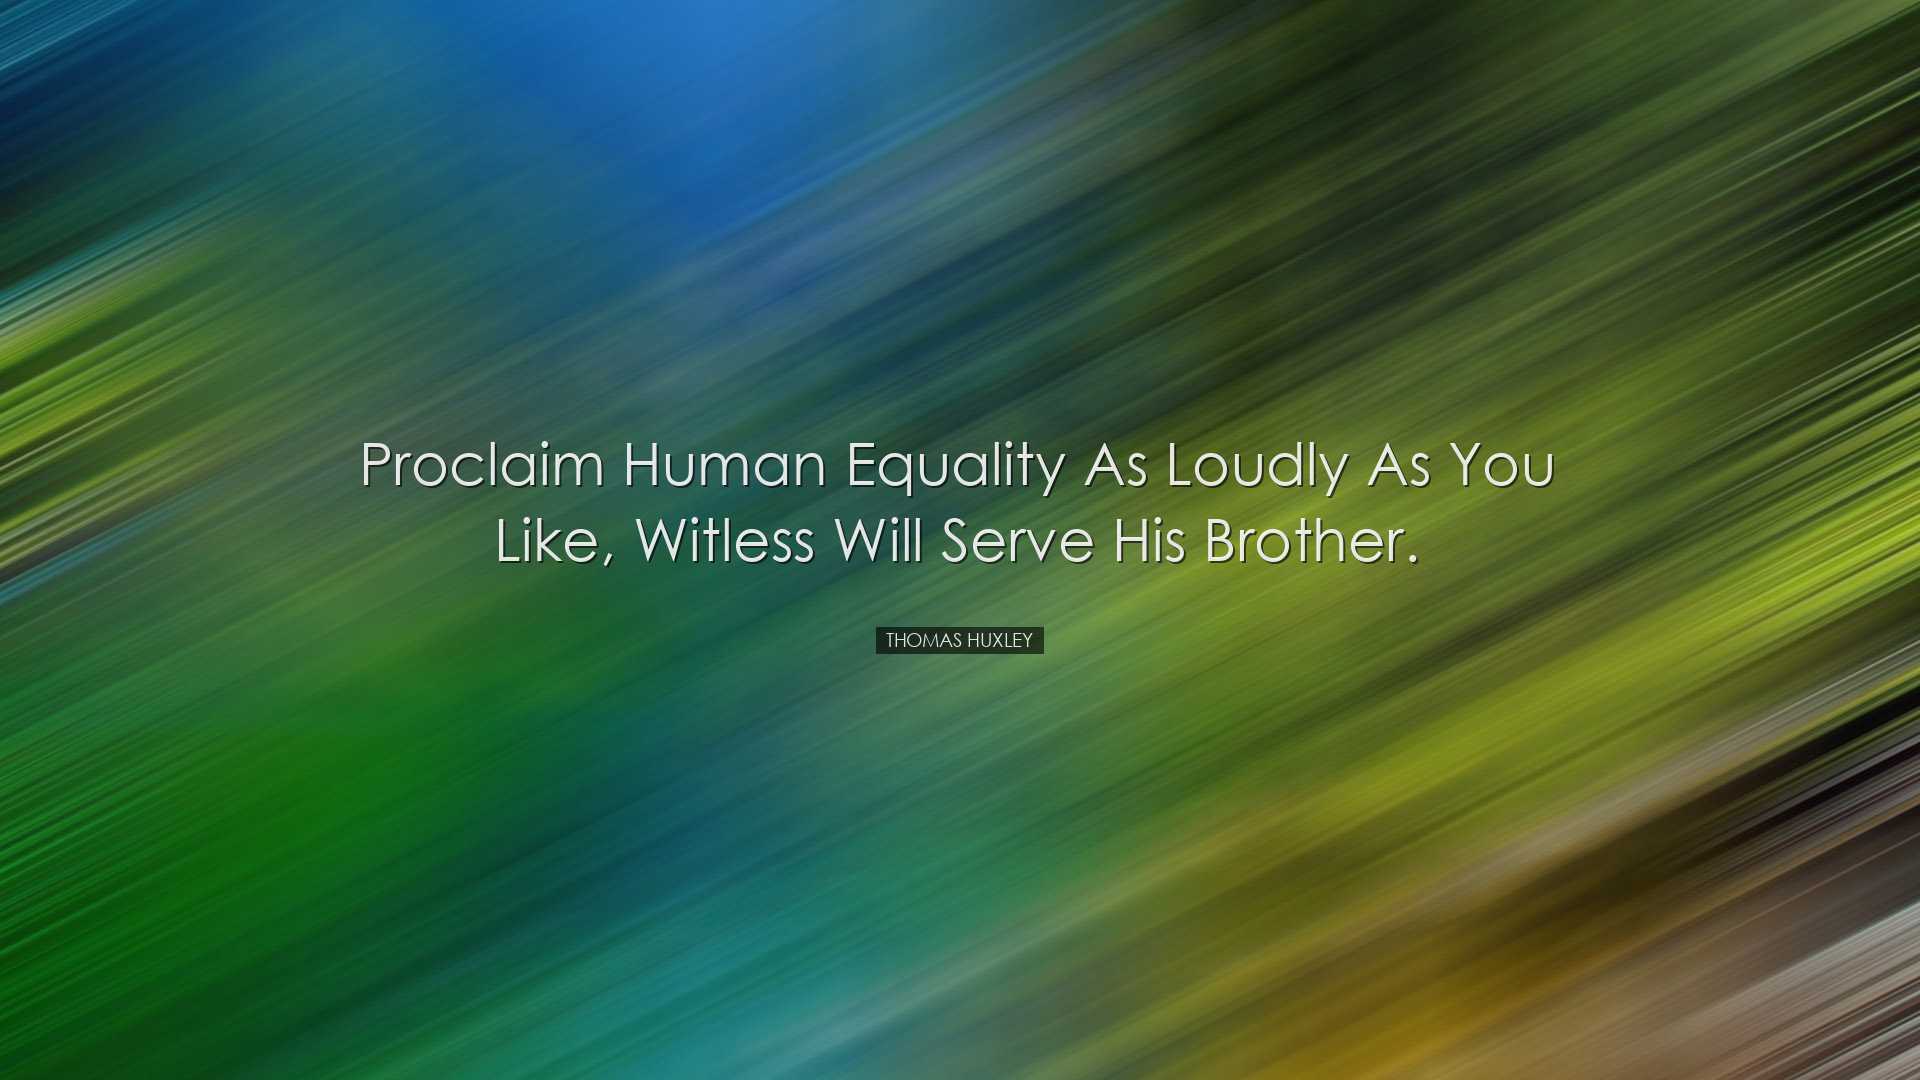 Proclaim human equality as loudly as you like, Witless will serve